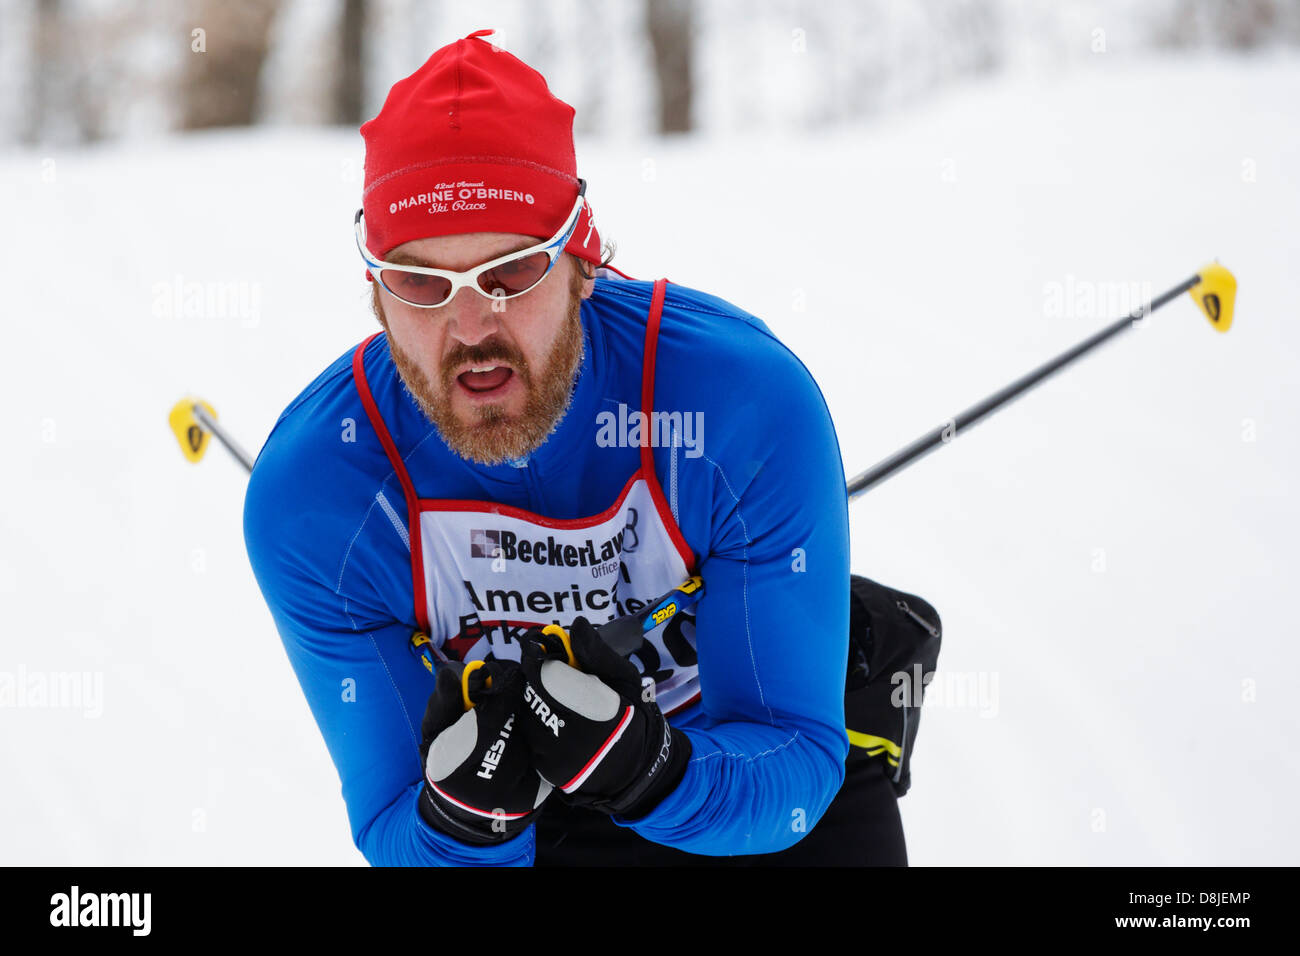 A classic style competitor skis in the American Birkebeiner cross country race in Northern Wisconsin, USA. Stock Photo